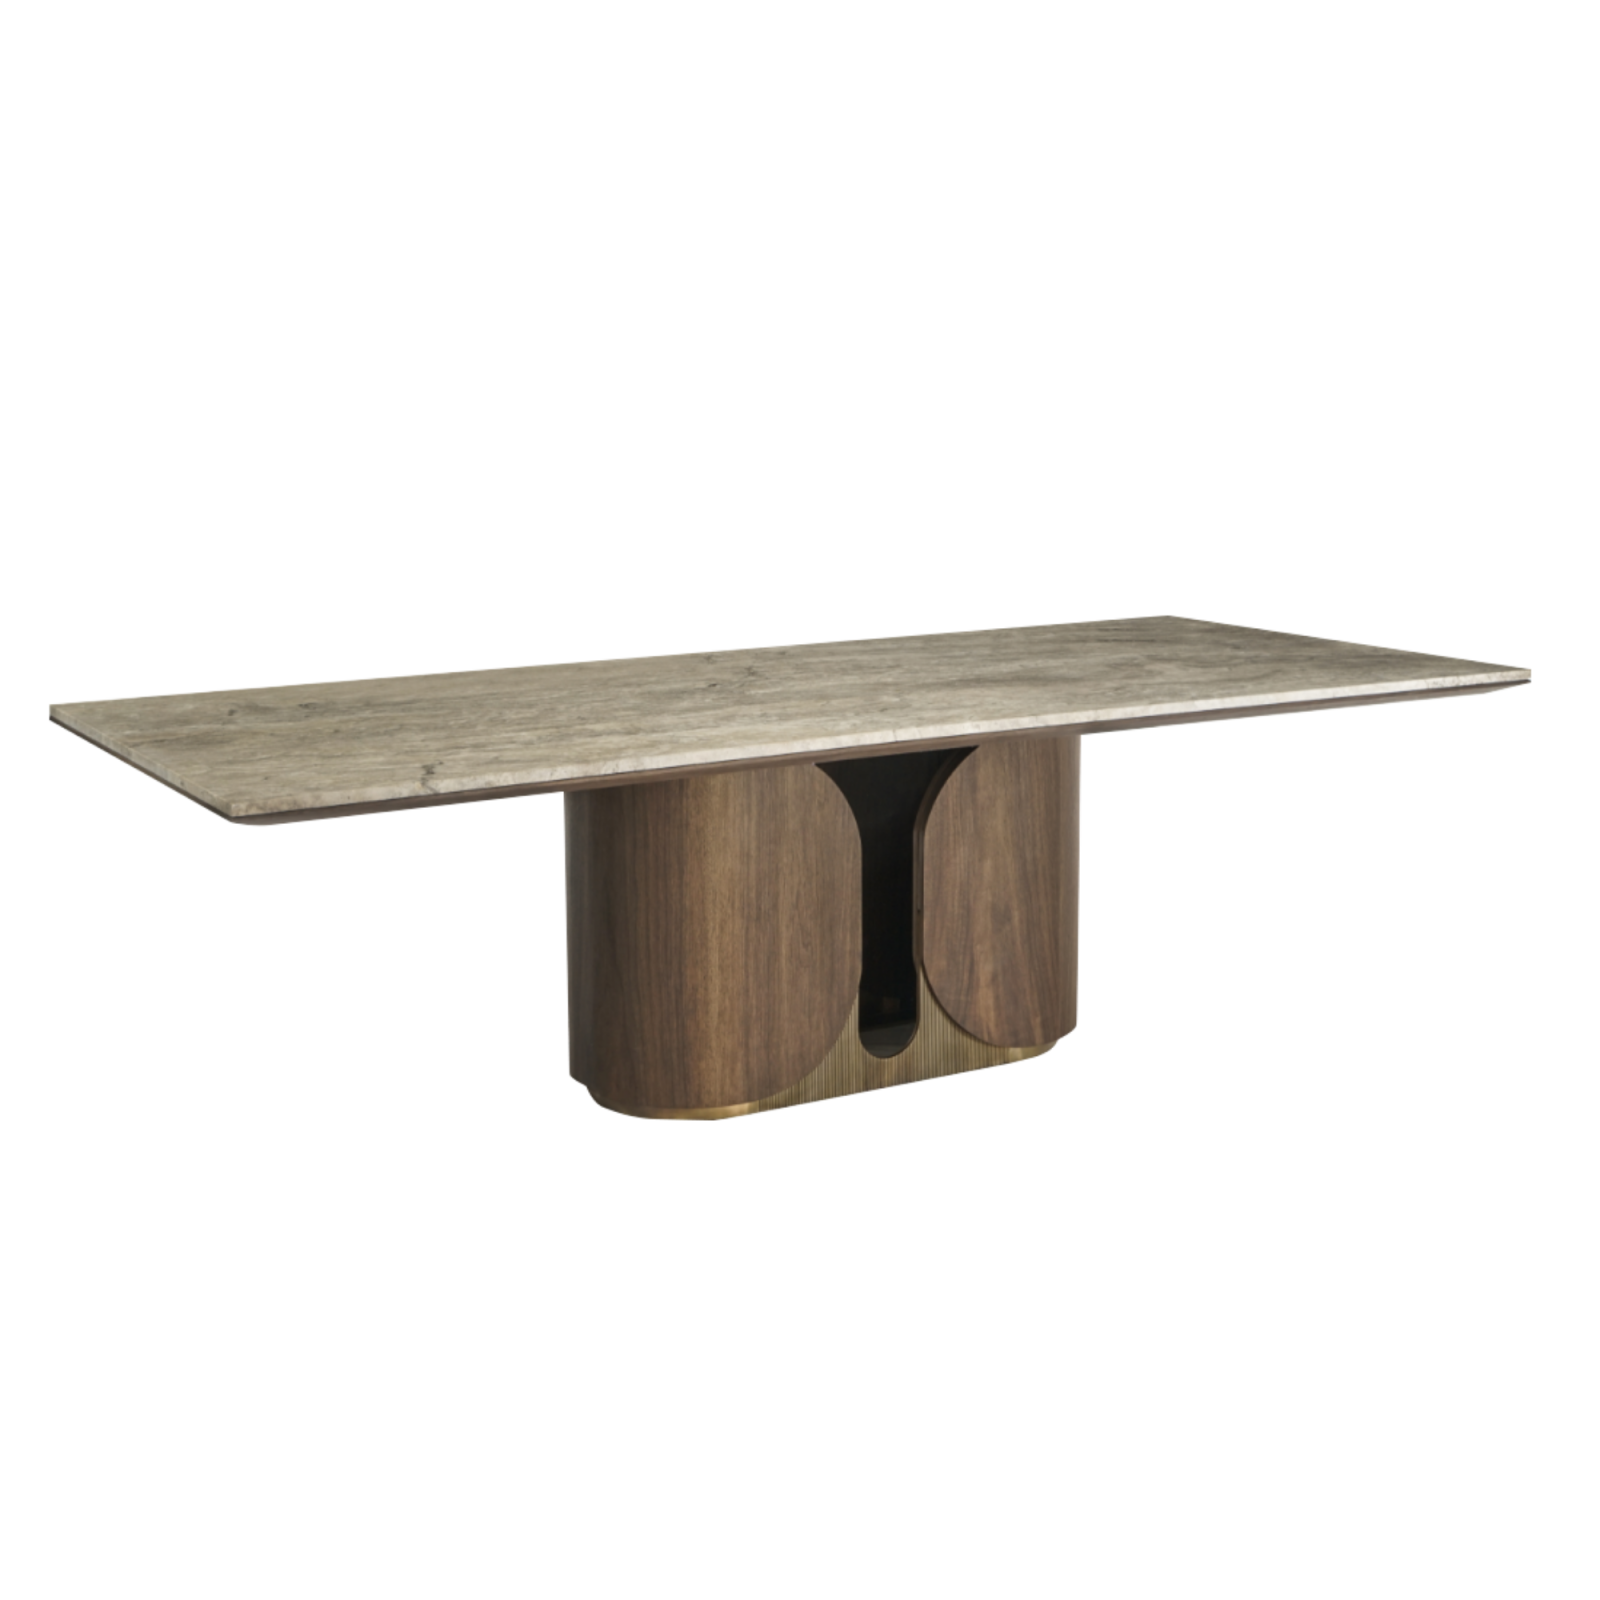 Stylish Horus Table which is made from walnut cover and aged brass standing on a white background